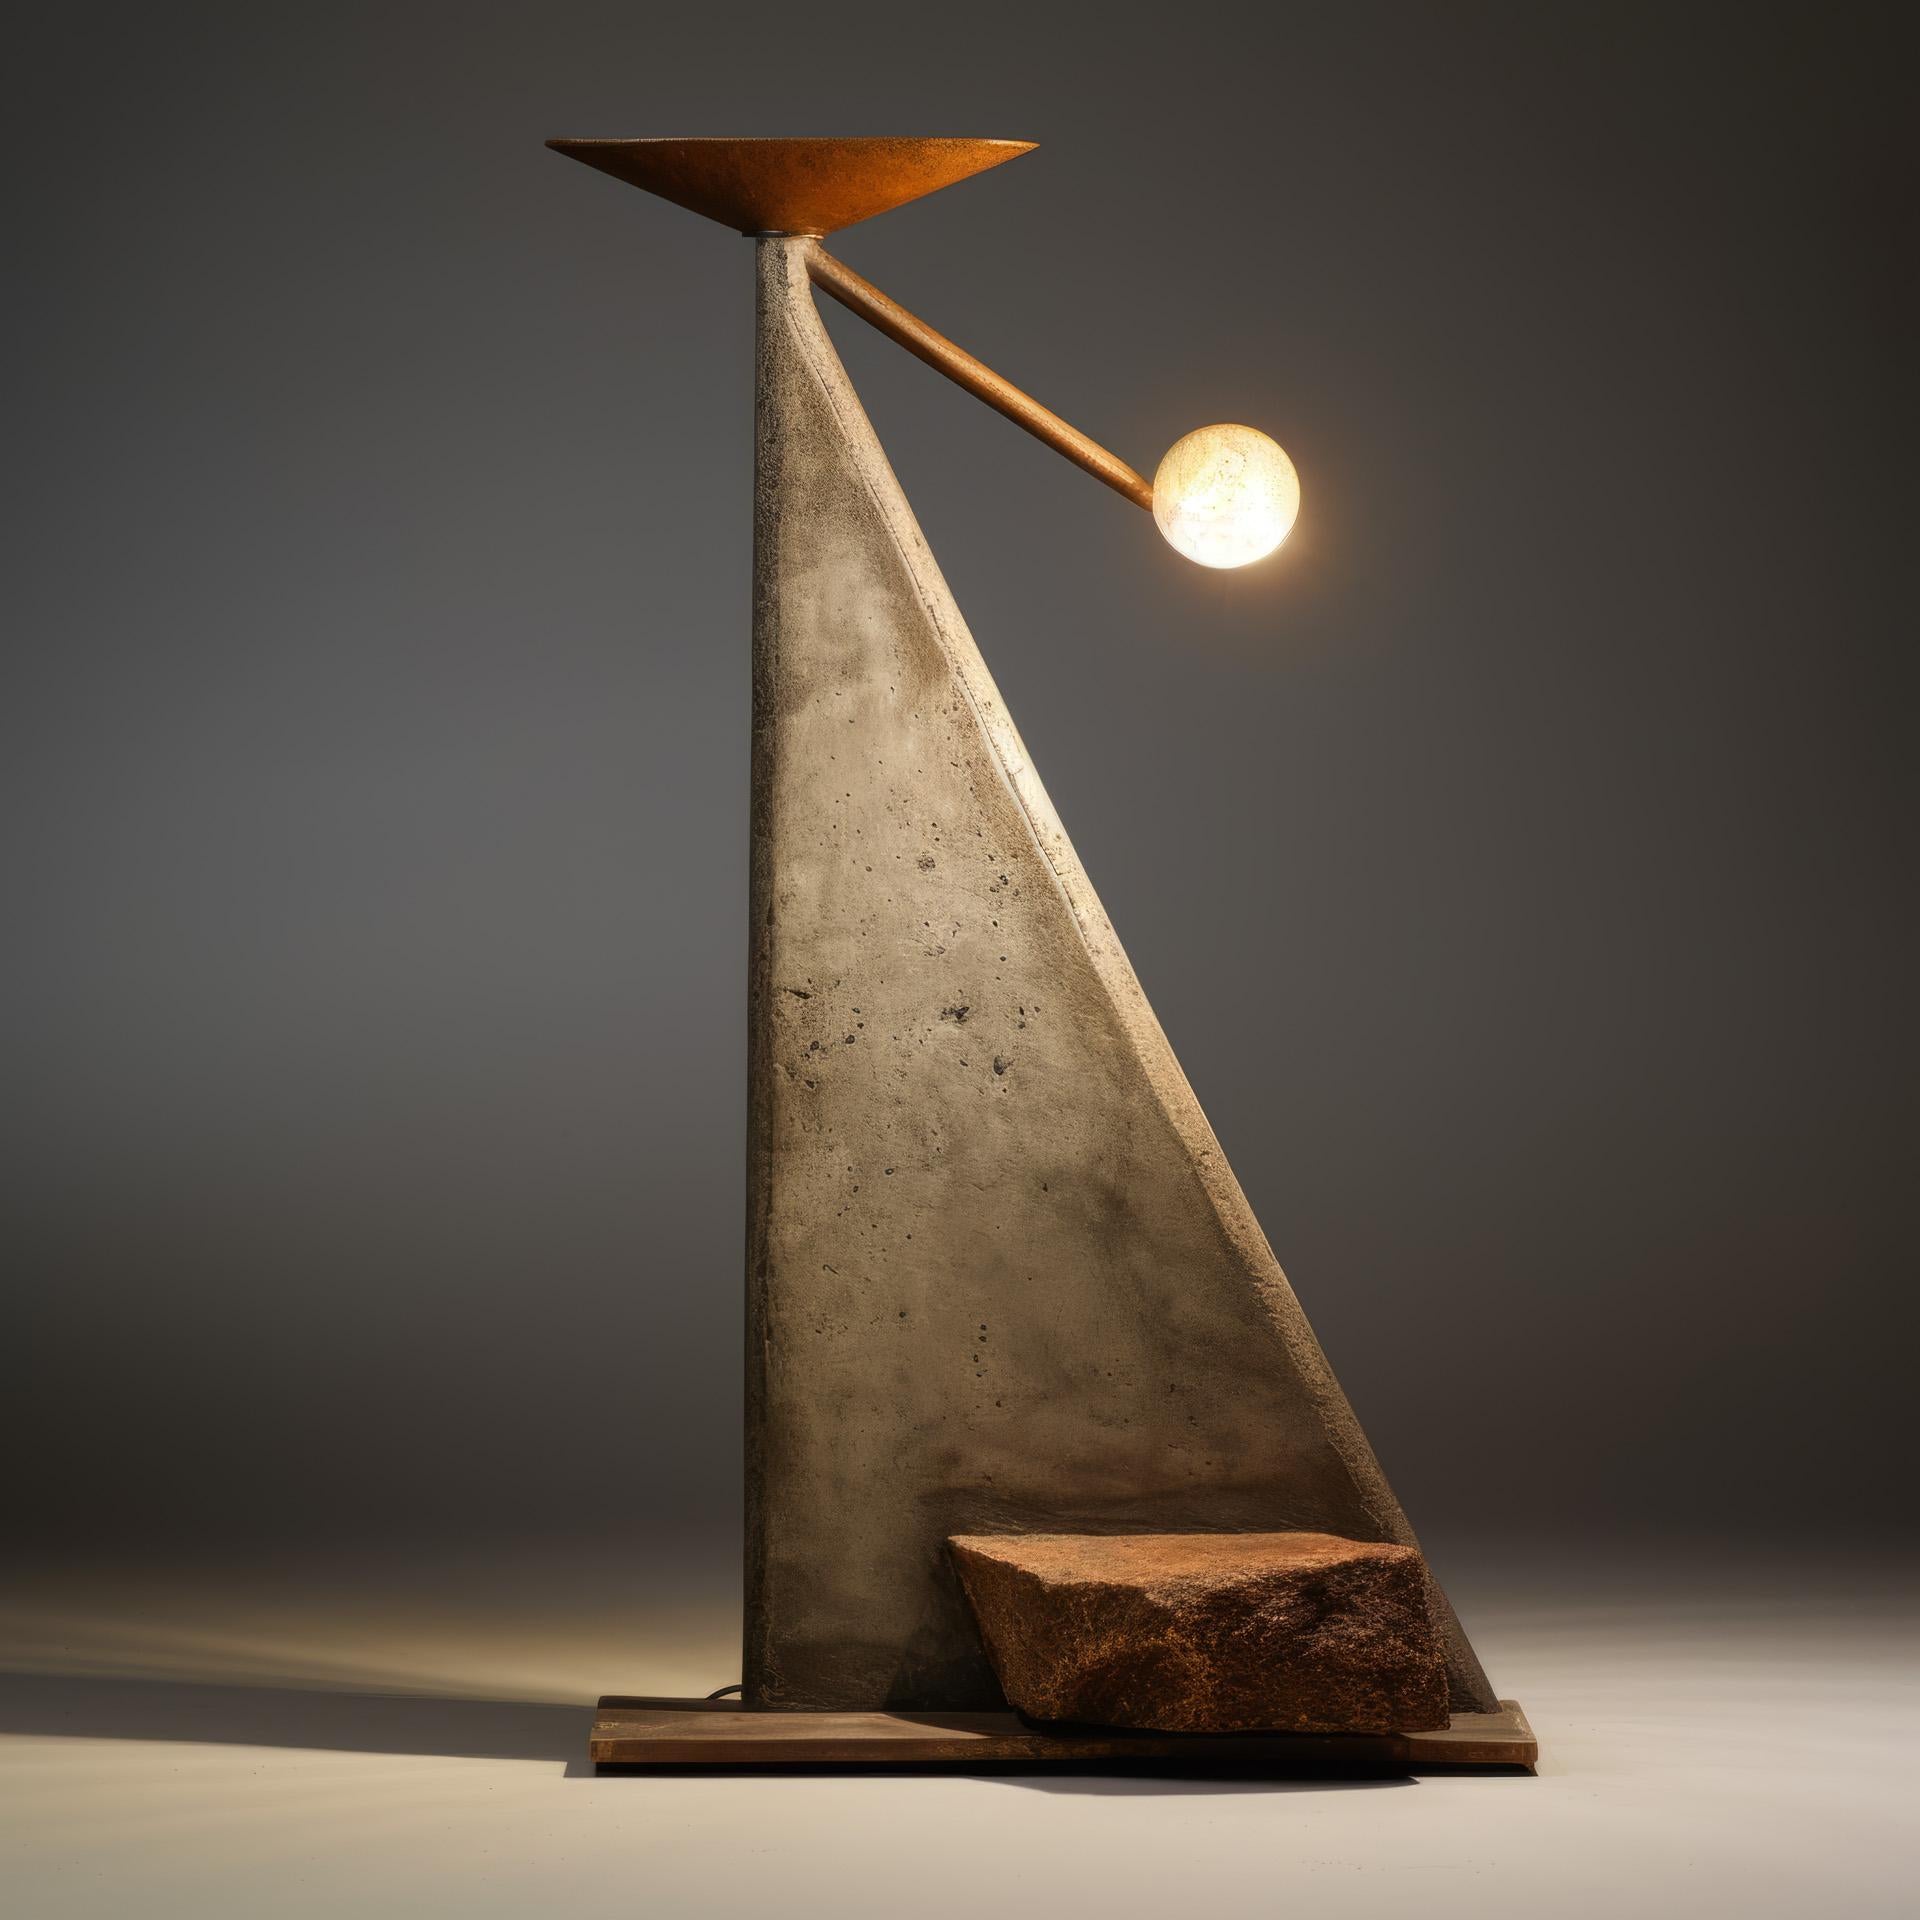 Huo Ju Floor Lamp by objective OBJECT Studio
Dimensions: D 58.5 x W 95 x H 167.5 cm 
Materials: Concrete, sandstone, steel, plaster, acrylics, led.

All our lamps can be wired according to each country. If sold to the USA it will be wired for the